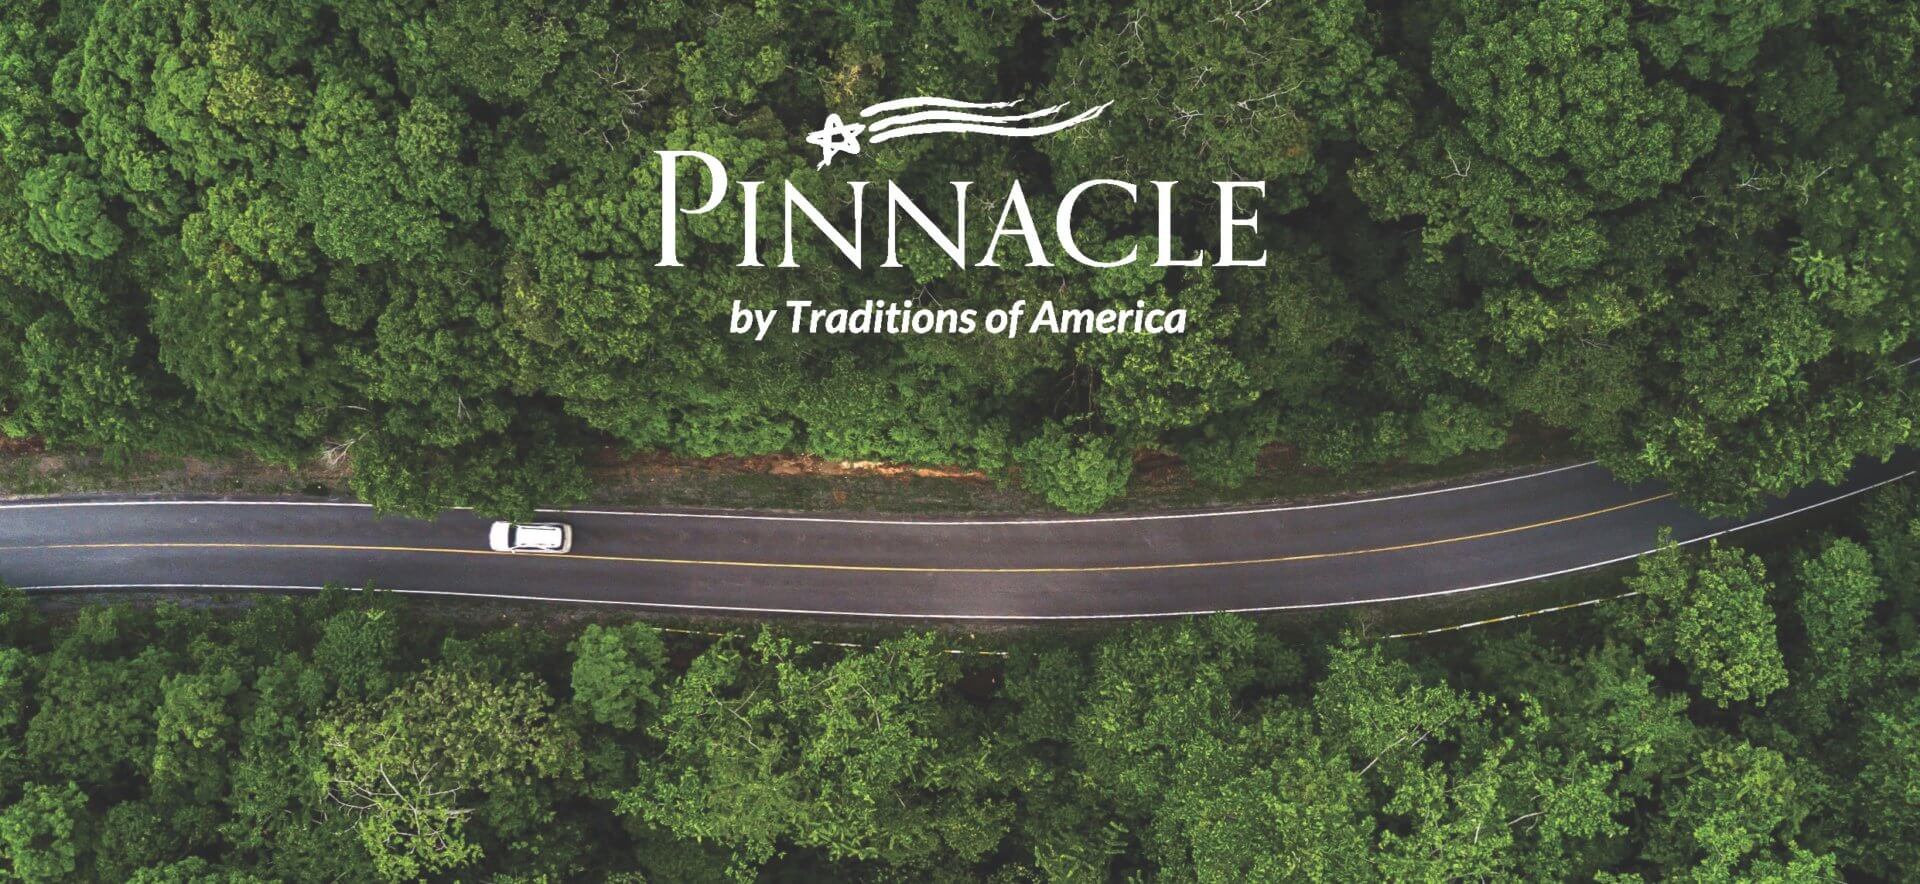 Pinnacle by Traditions of America